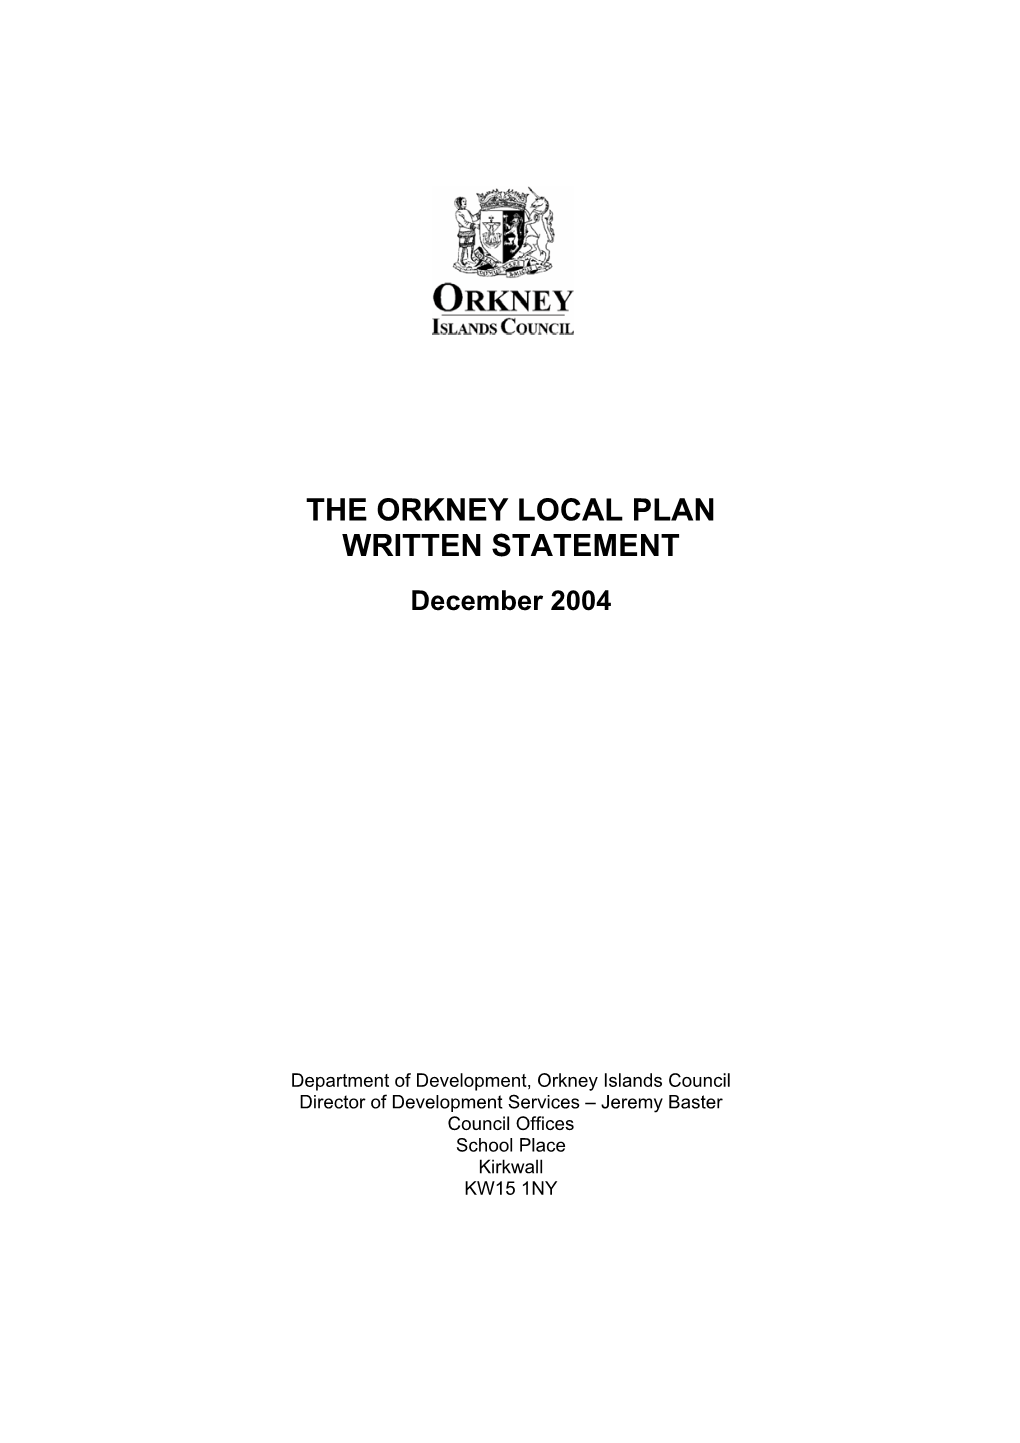 The Orkney Local Plan Written Statement